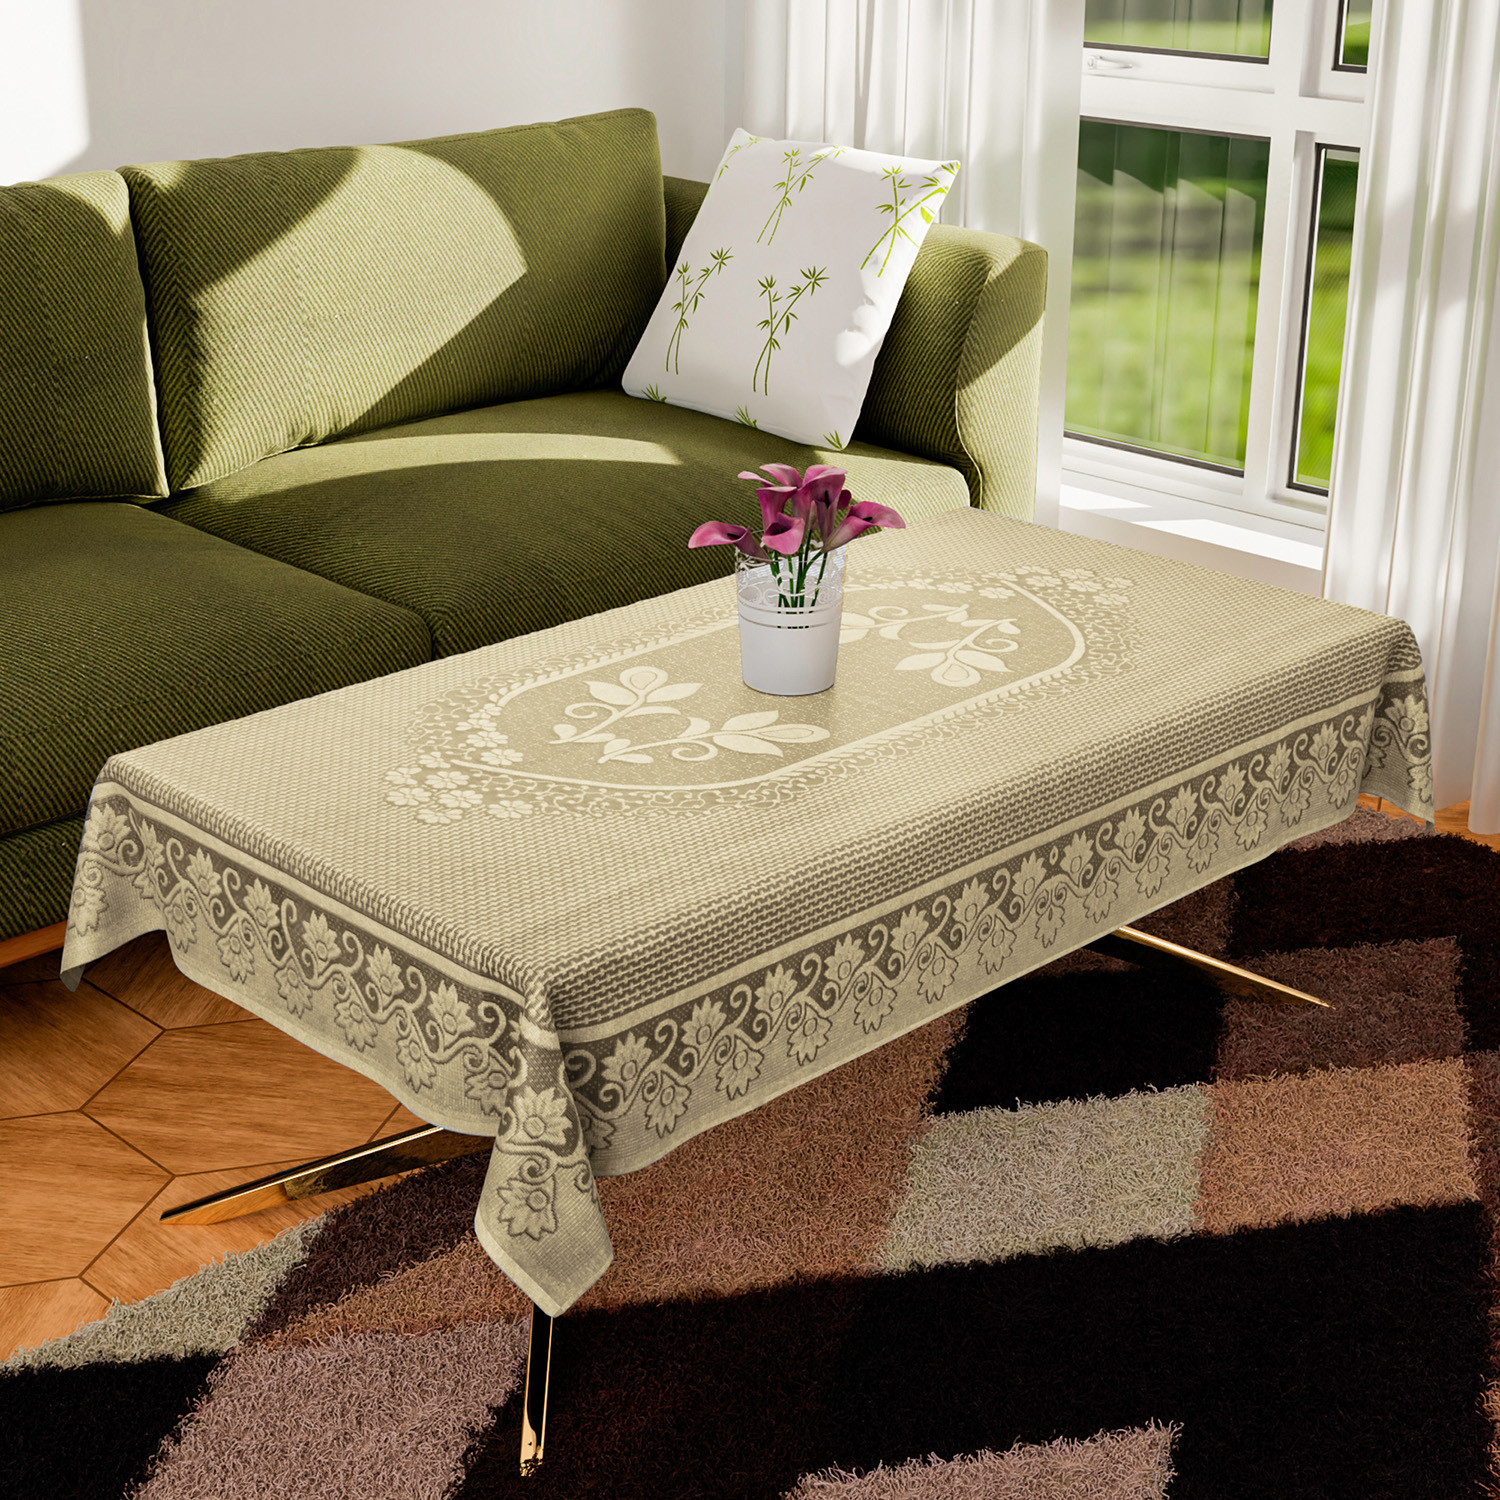 Kuber Industries Center Table Cover|Cotton Luxurious Net Floral S-19 Design|Stain-Resistant & Anti Skid Coffee Table Cover|40x60 Inch (Cream)